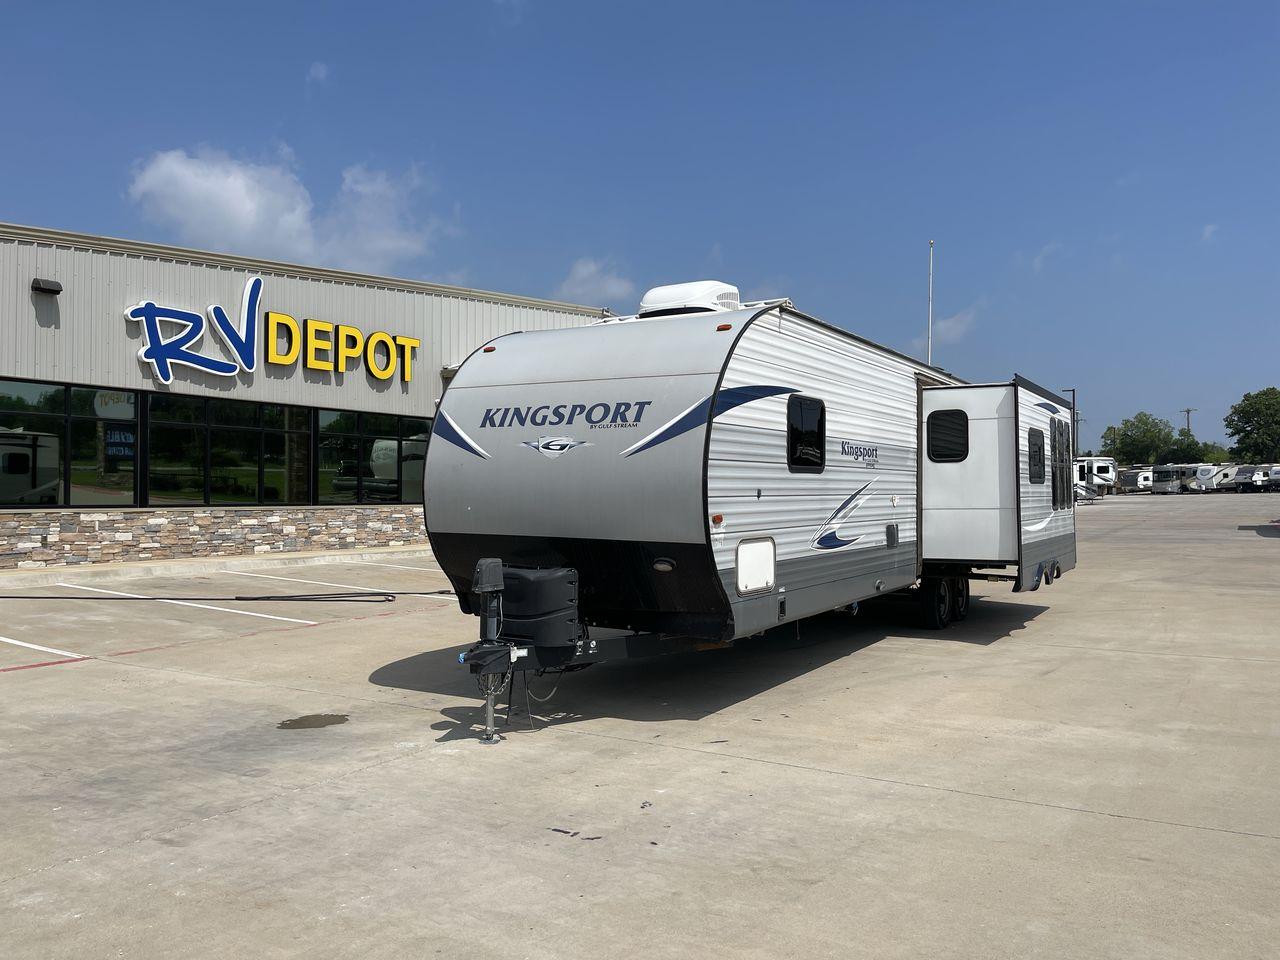 2019 GRAY GULF STREAM KINGSPORT 295SBW - (1NL1G3524K1) , Length: 34.5 ft | Dry Weight: 6,778 lbs | Slides: 1 transmission, located at 4319 N Main Street, Cleburne, TX, 76033, (817) 221-0660, 32.435829, -97.384178 - The 2019 Gulf Stream Kingsport 295SBW combines comfort and functionality in a well-designed package. This travel trailer is ready to meet your demands on the road. The Gulf Stream Kingsport 295SBW is 34.5 feet long and has a dry weight of 6,778 pounds, striking a compromise between size and maneuver - Photo #0